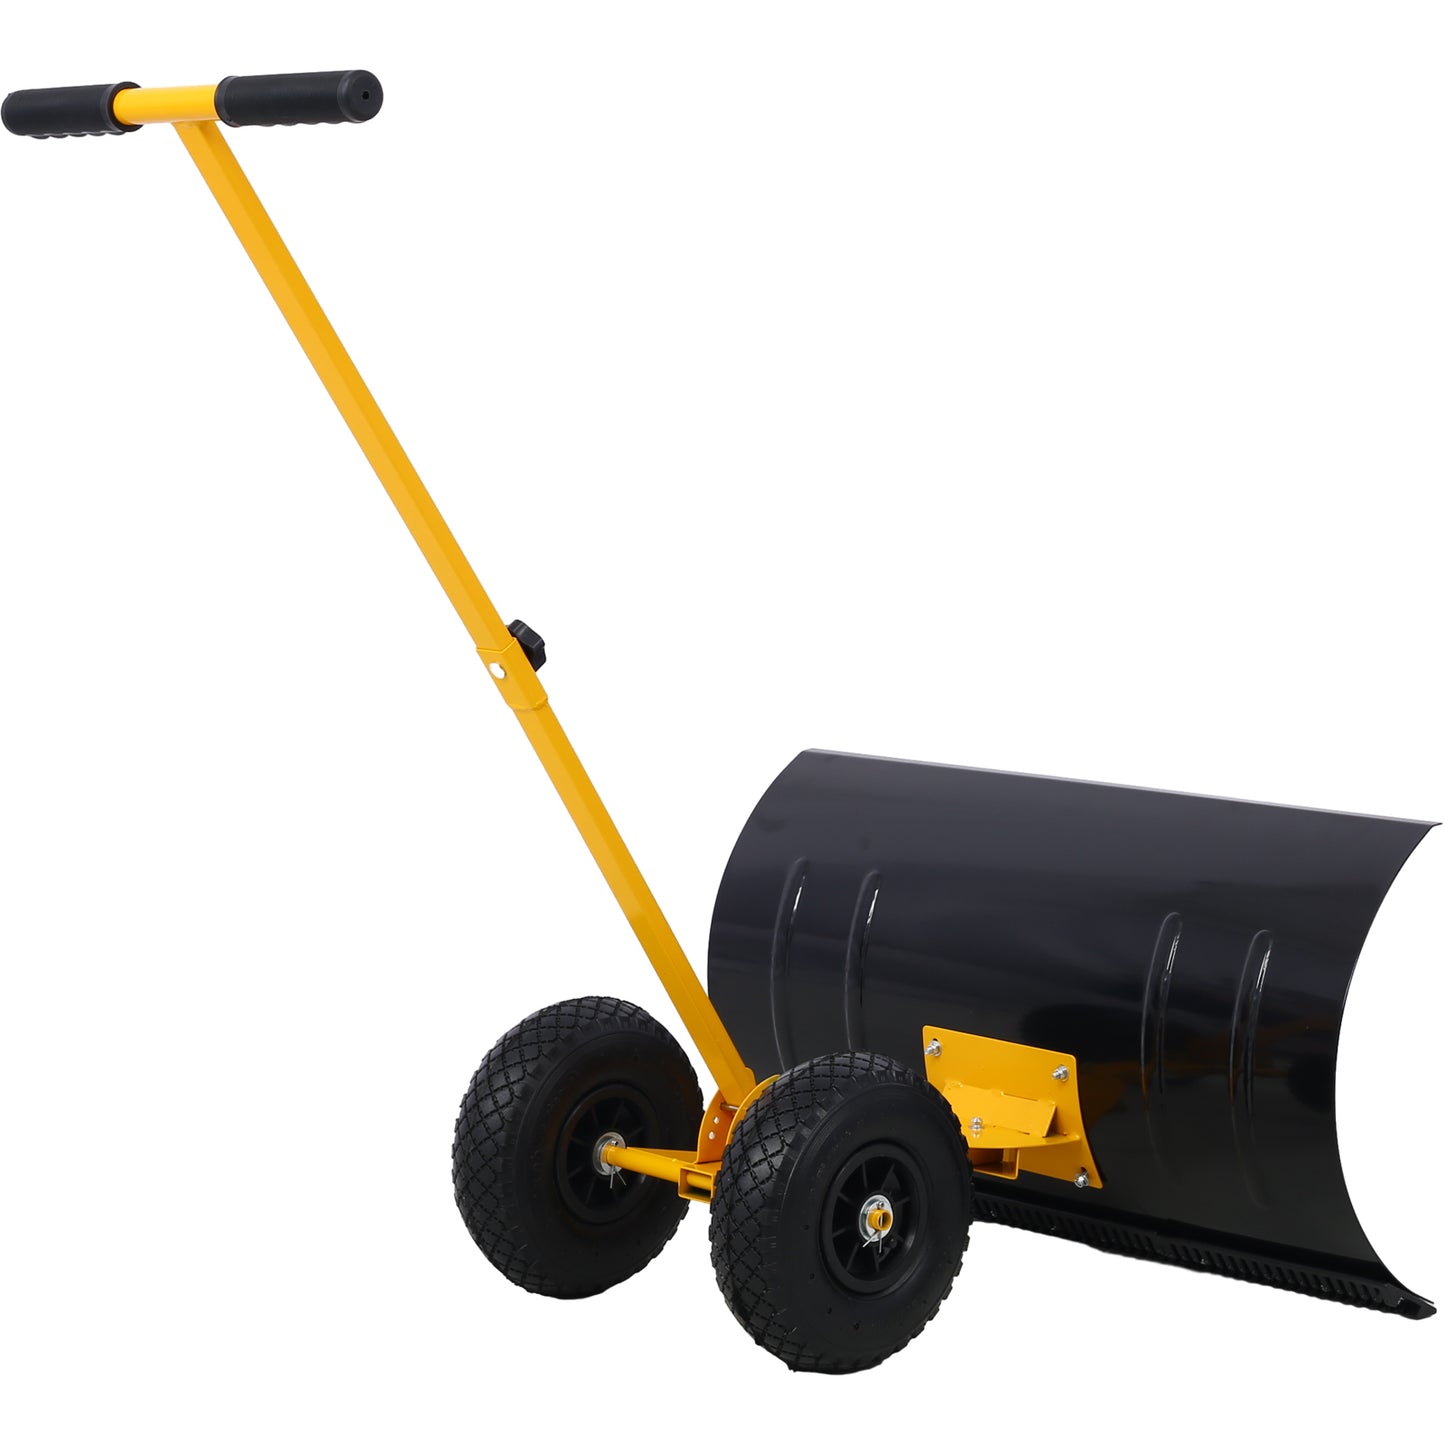 Snow Shovel with Wheels, Snow Pusher, Cushioned Adjustable Angle Handle Snow Removal Tool, 29" Blade, 10" Wheels,yellow color